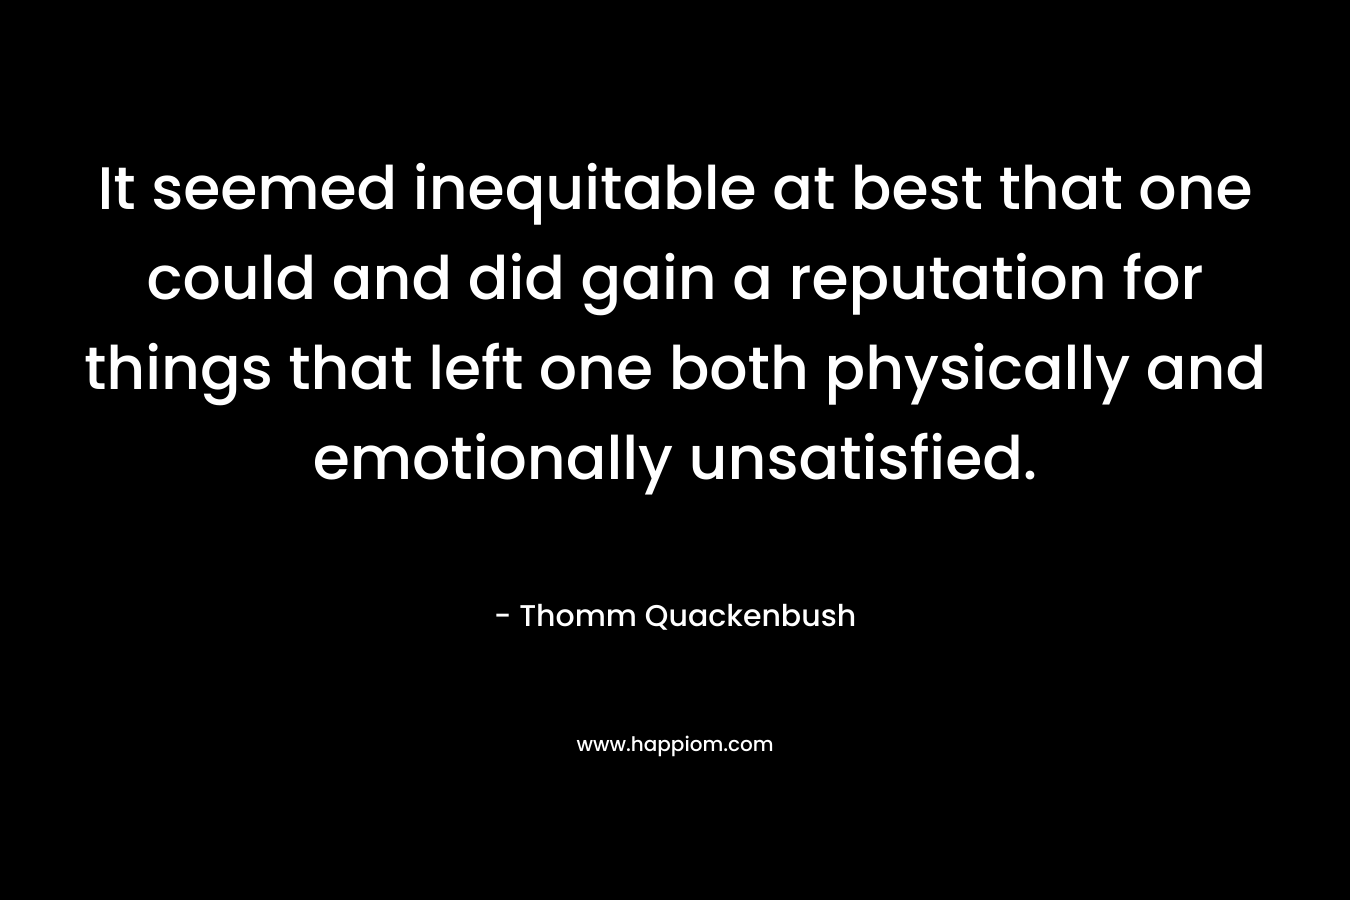 It seemed inequitable at best that one could and did gain a reputation for things that left one both physically and emotionally unsatisfied. – Thomm Quackenbush